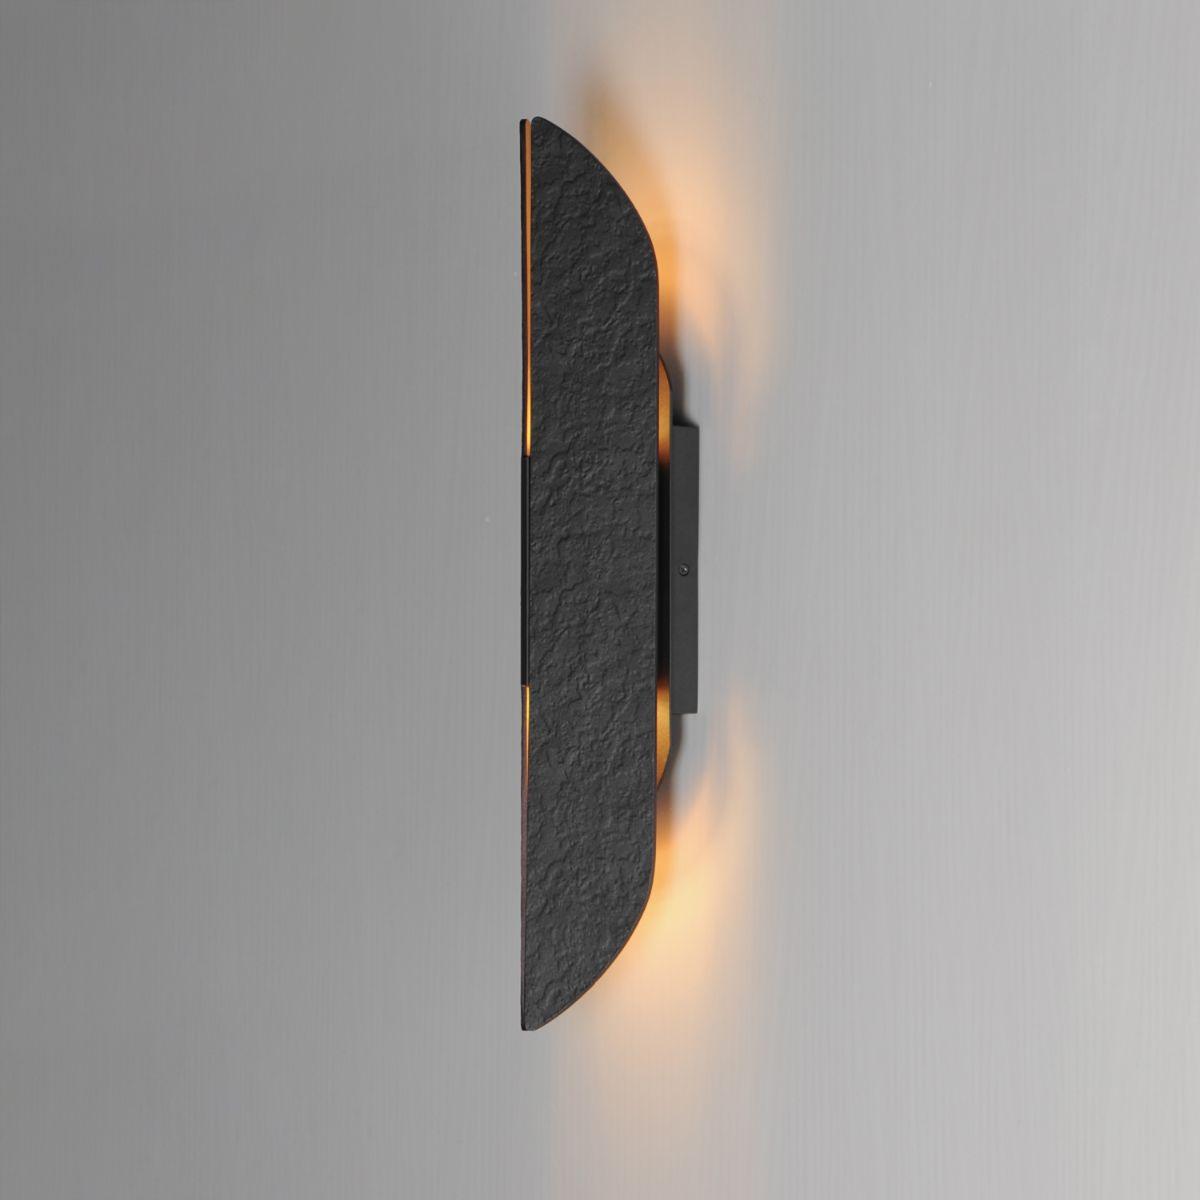 Tectonic 22 in. LED Outdoor Wall Sconce 3000K Black Finish